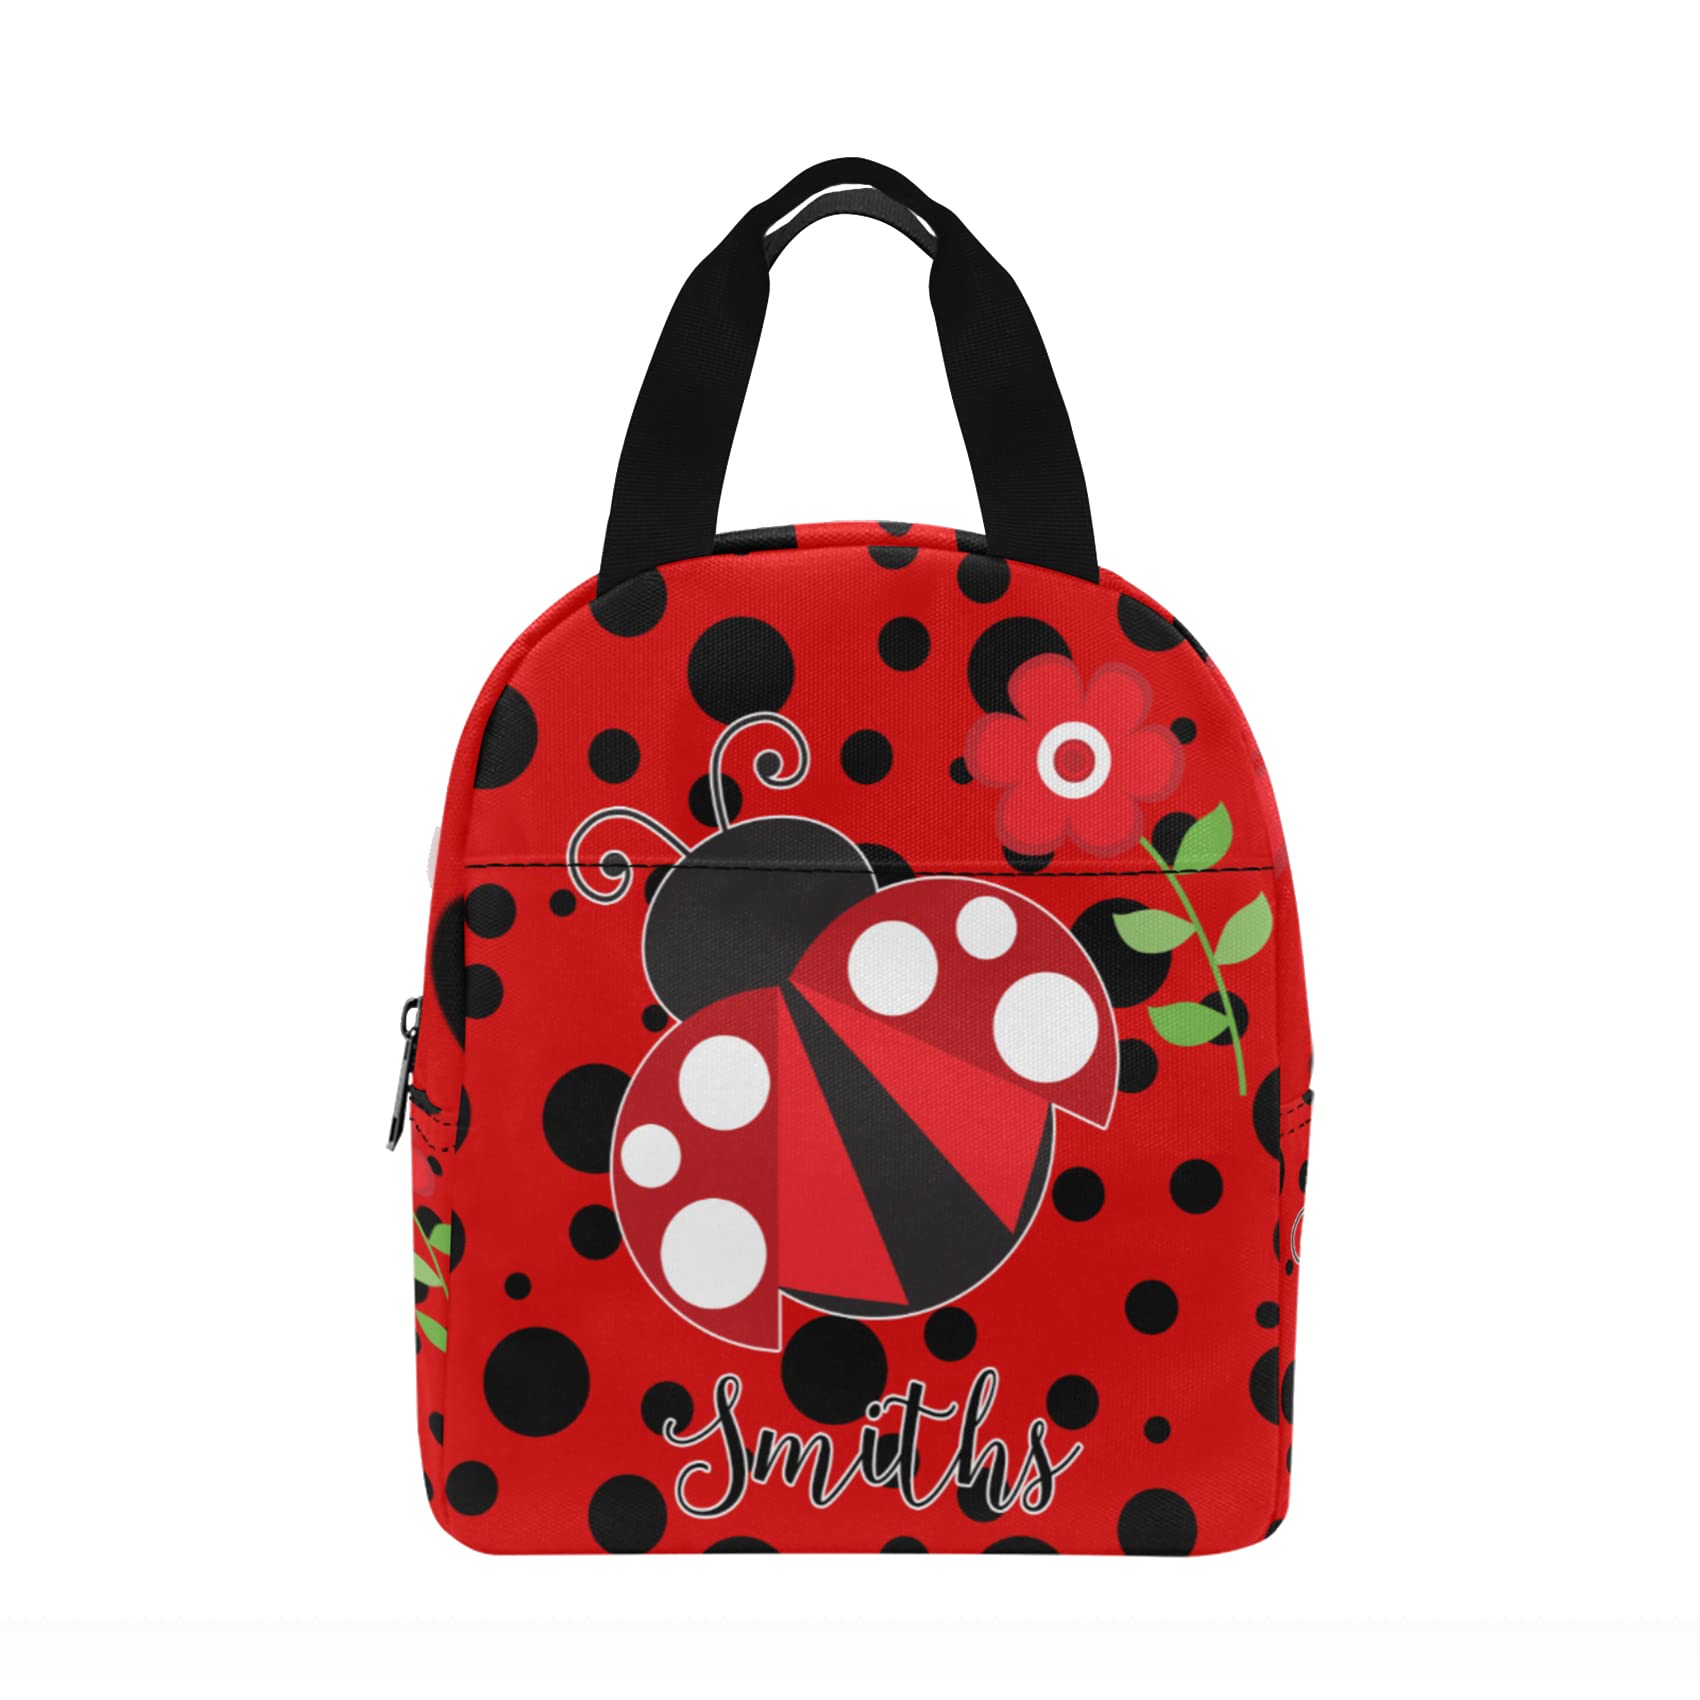 Deargifts Ladybugs Lunch Bag Cute Floral Lunch Bag for Women Men Personalized Custom Name Lunch Bag For Girls Boys Lunch Box Tote Bag Insulated Reusable Lunch Bag for Work, School, Picnic or Travel